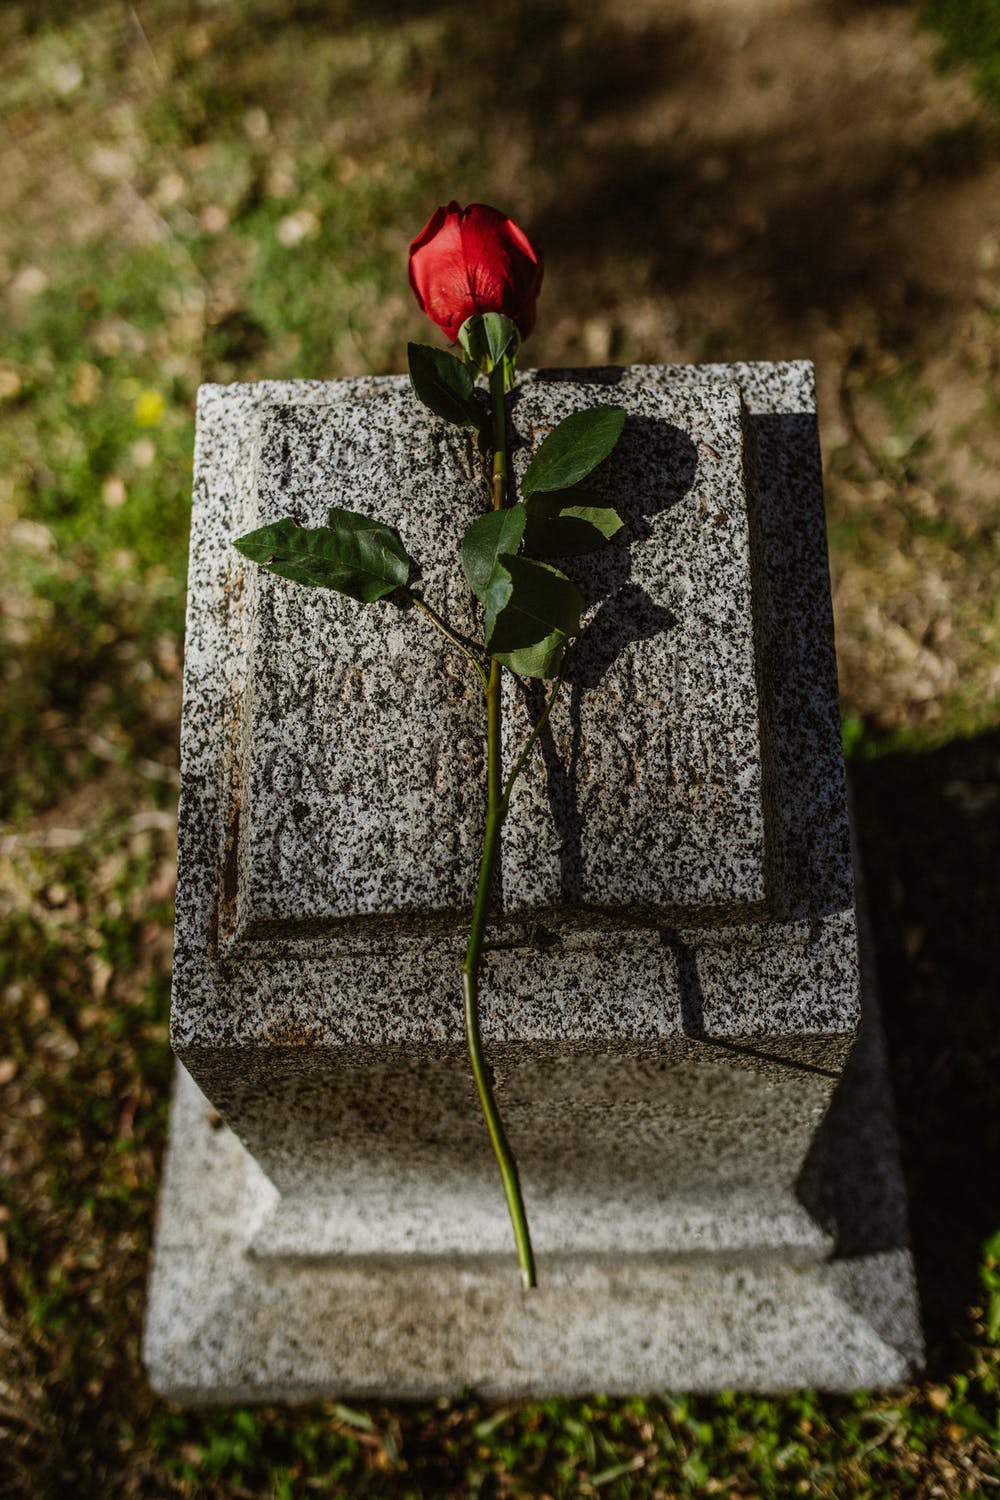 Mandy placed the red rose on her mother's grave. | Source: Unsplash